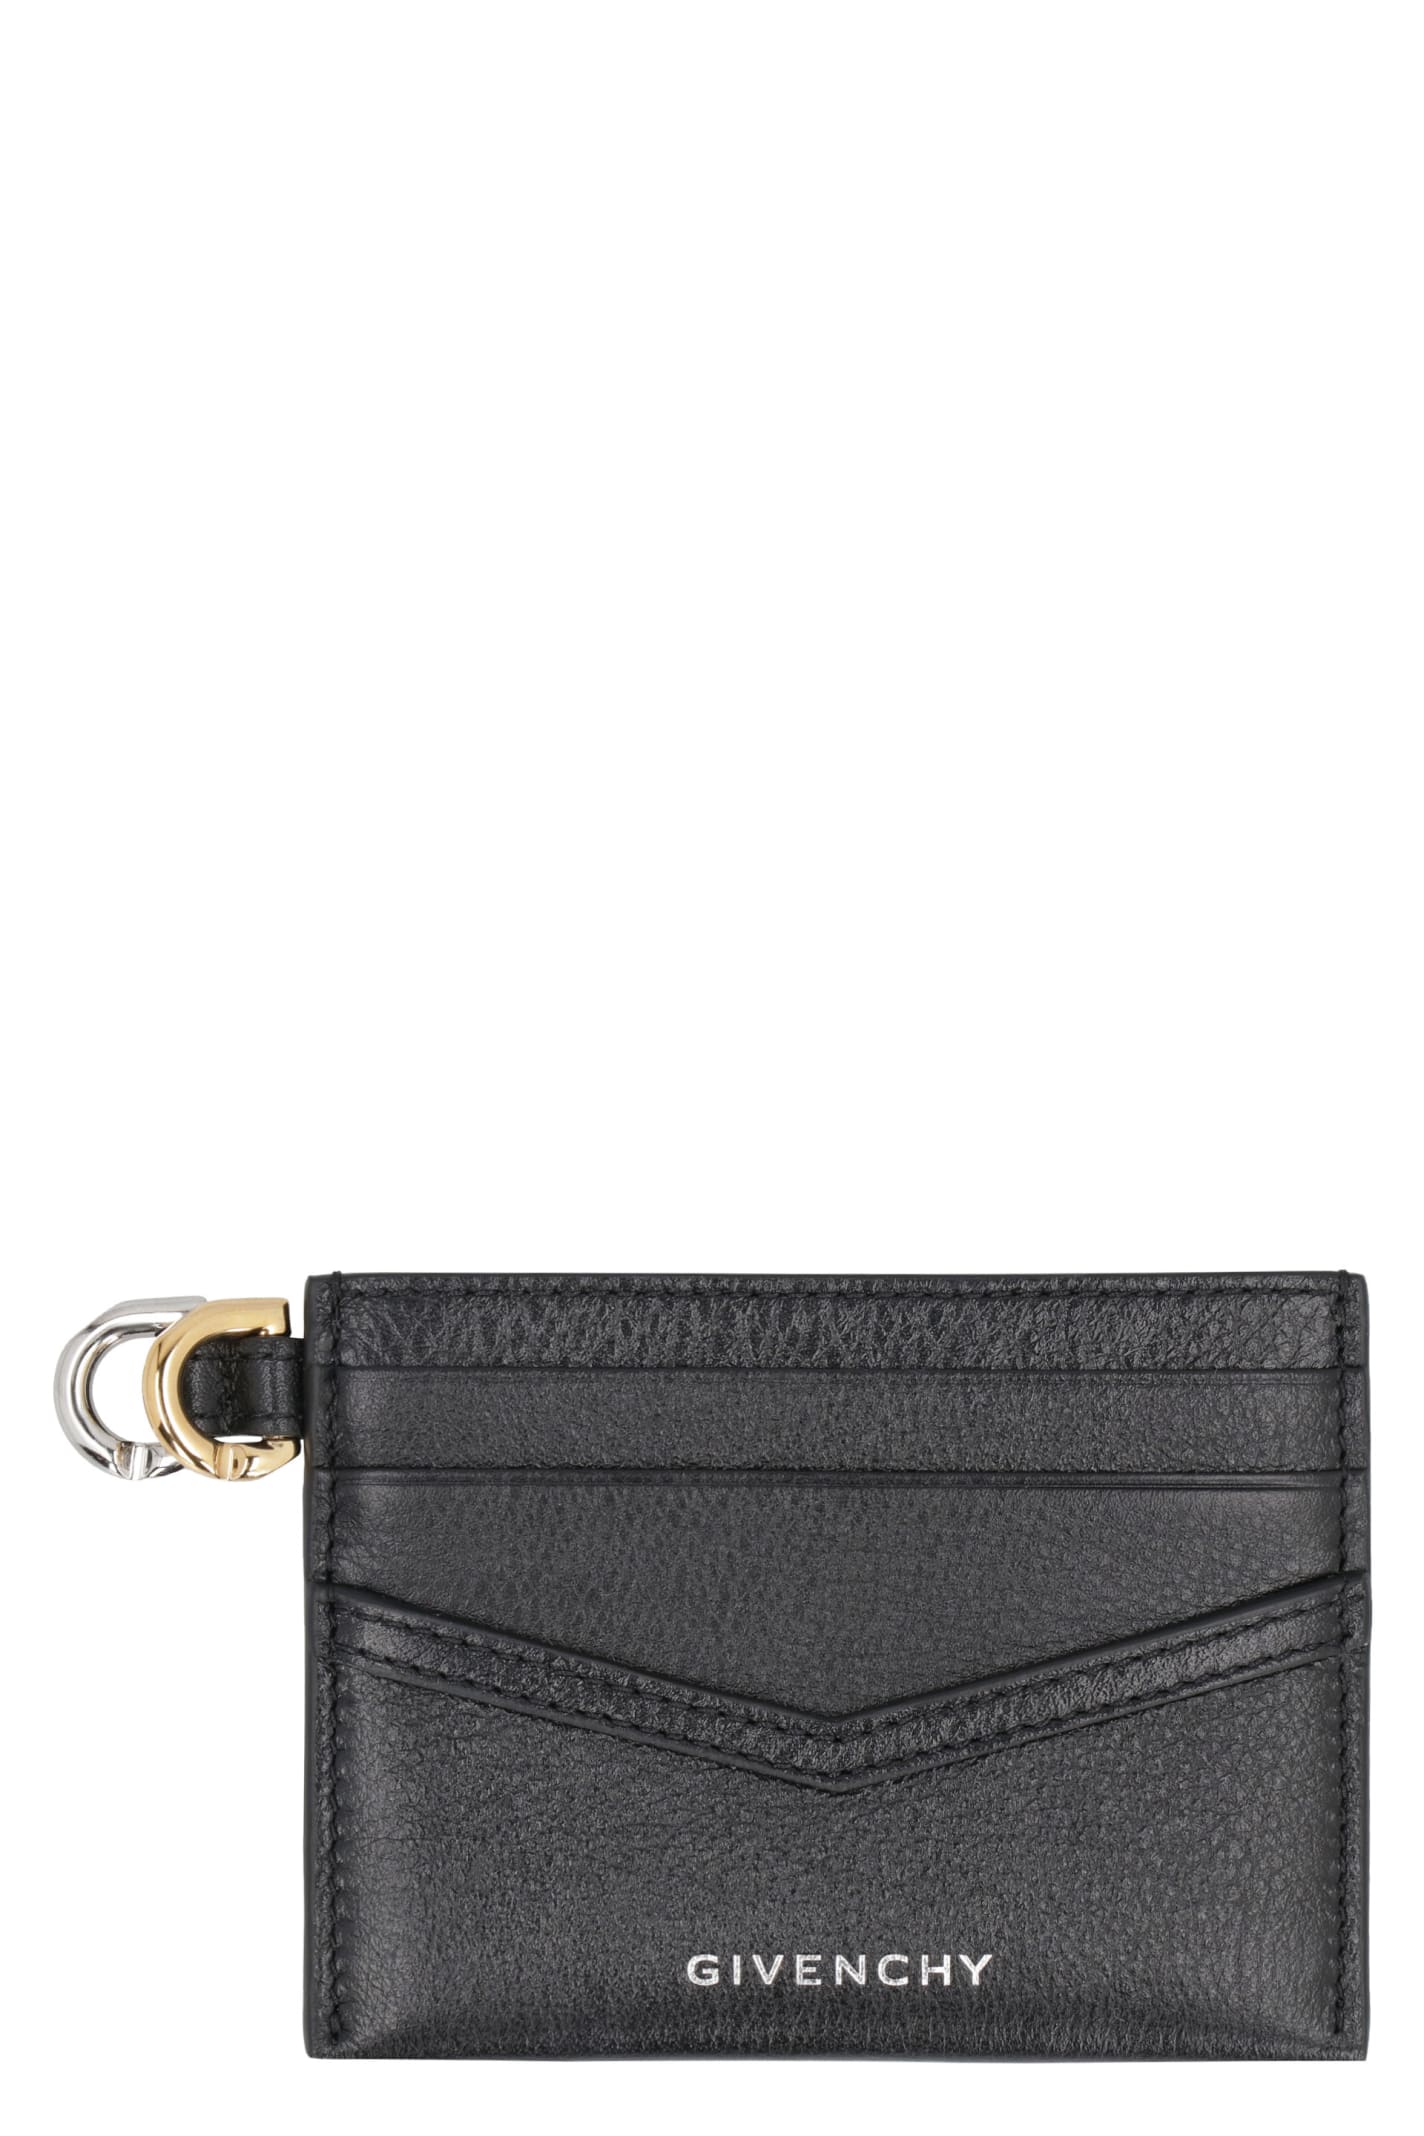 GIVENCHY VOYOU LEATHER CARD HOLDER